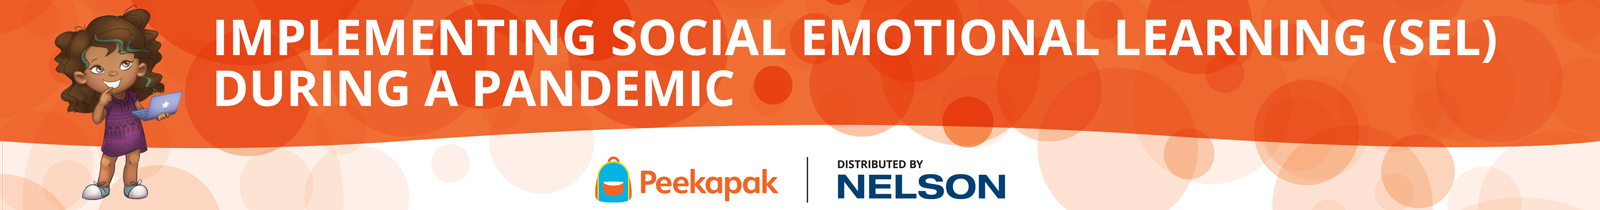 Implementing Social Emotional Learning (SEL) During a Pandemic. Peekapak, distributed by Nelson.